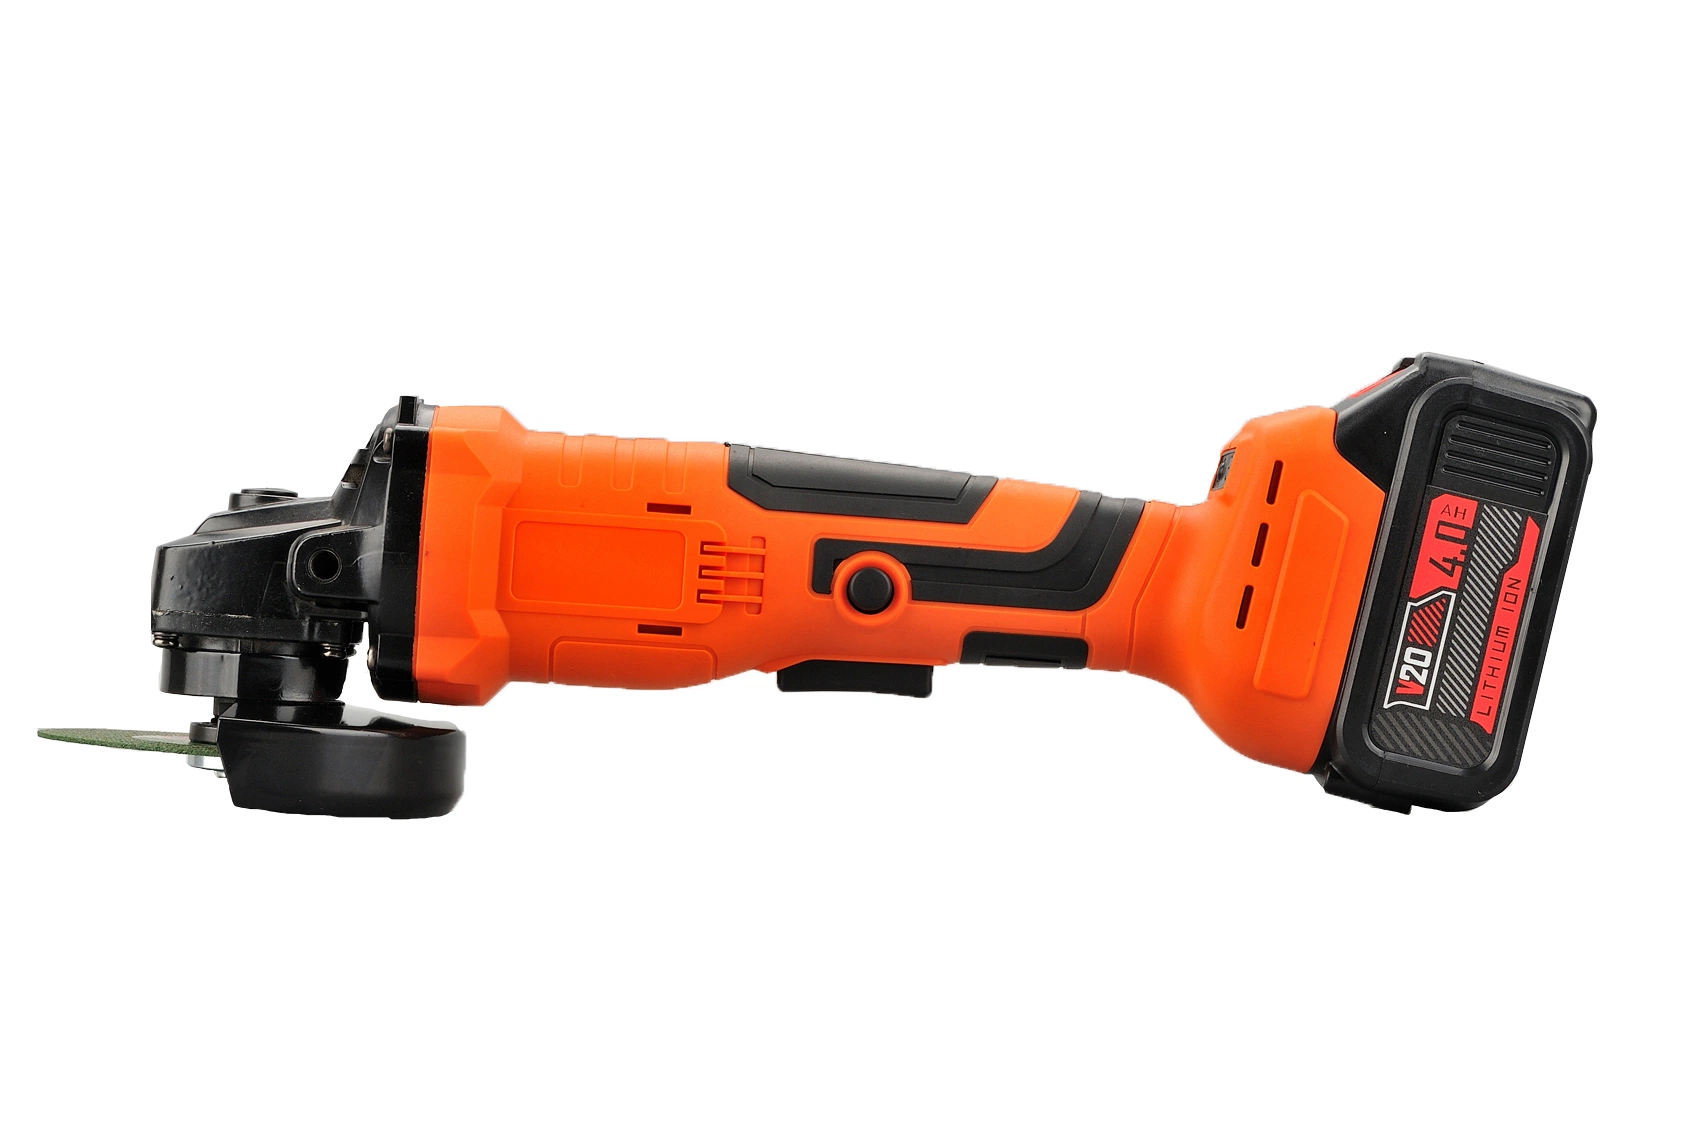 Youwe Lithium Cordless Anglegrinder, Angle Grinder, Cutting Tools for Construction Using.